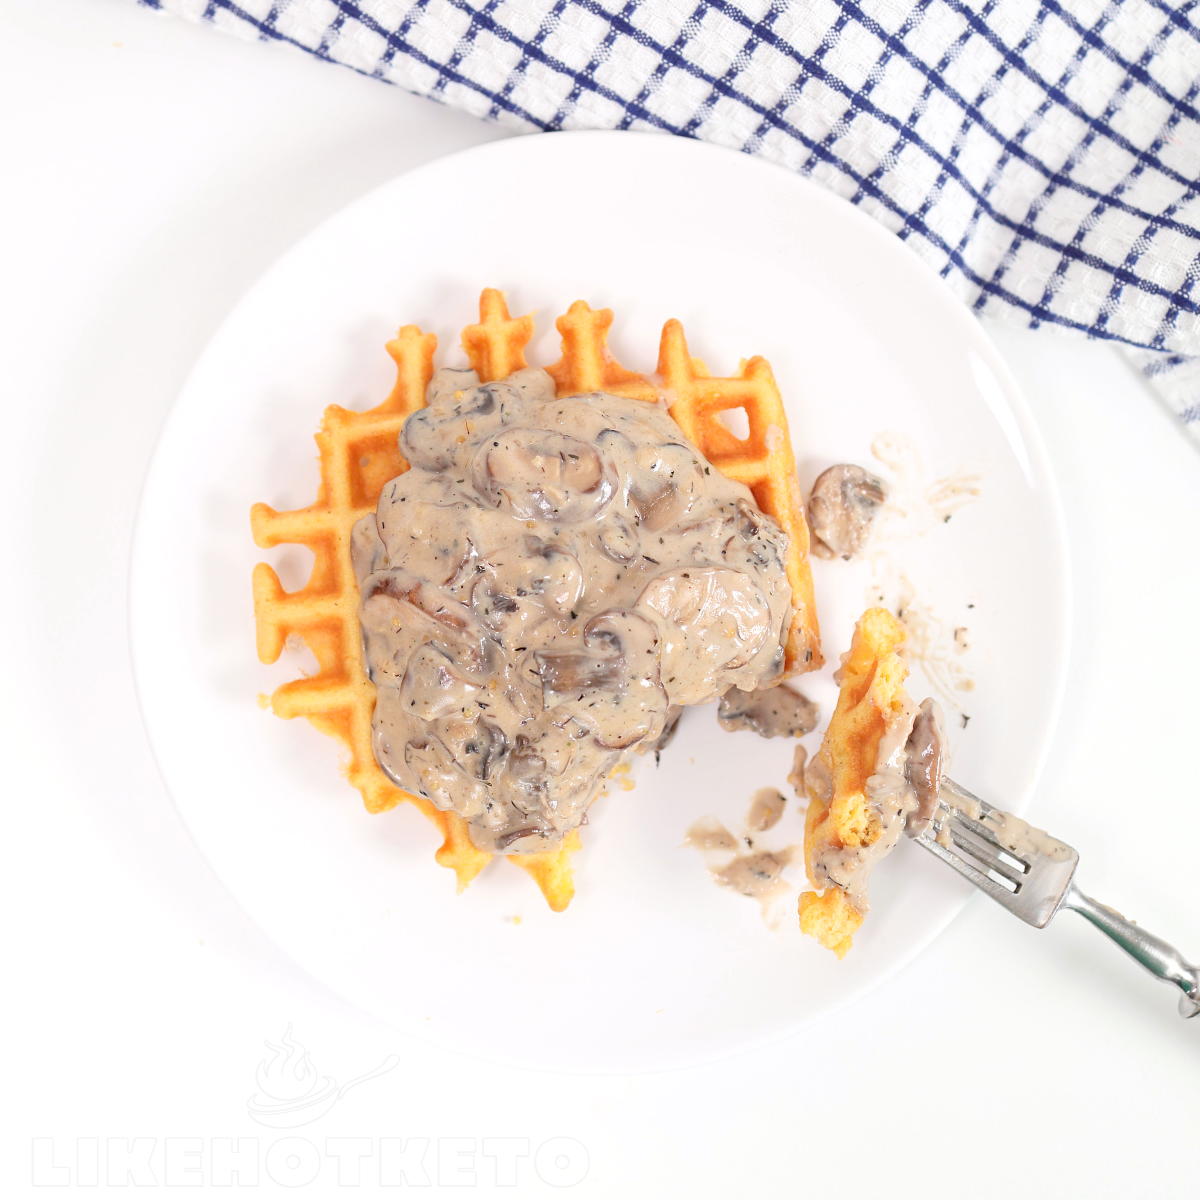 Chicken chaffle topped with mushroom sauce, bite taken with a fork.